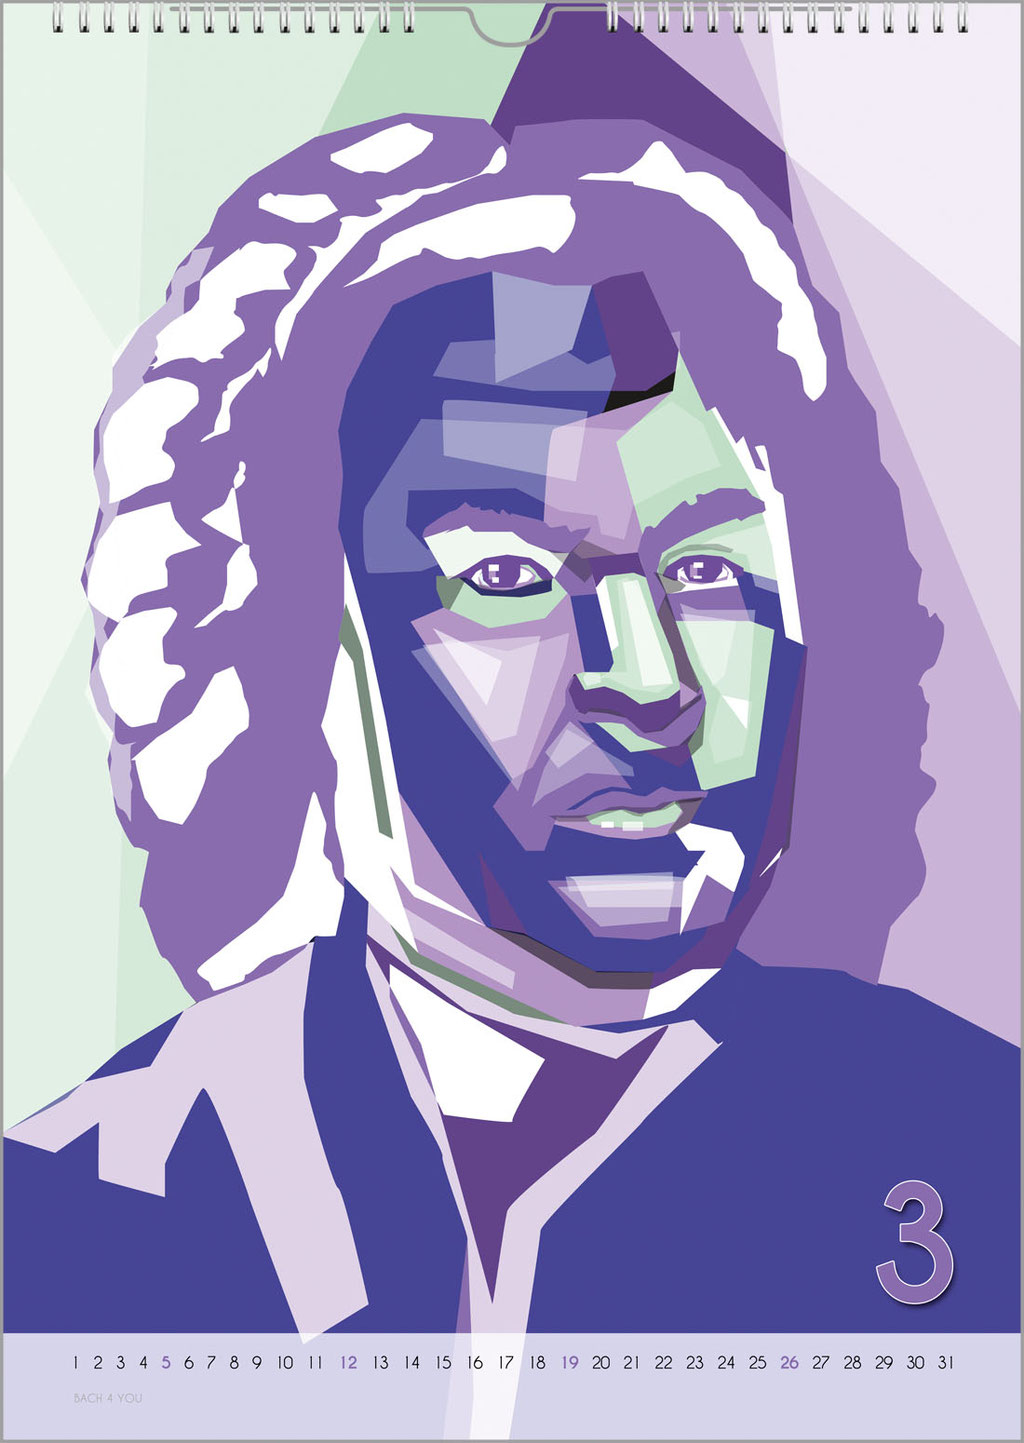 Bach Calendars Are Music Calendars and Music Gifts.